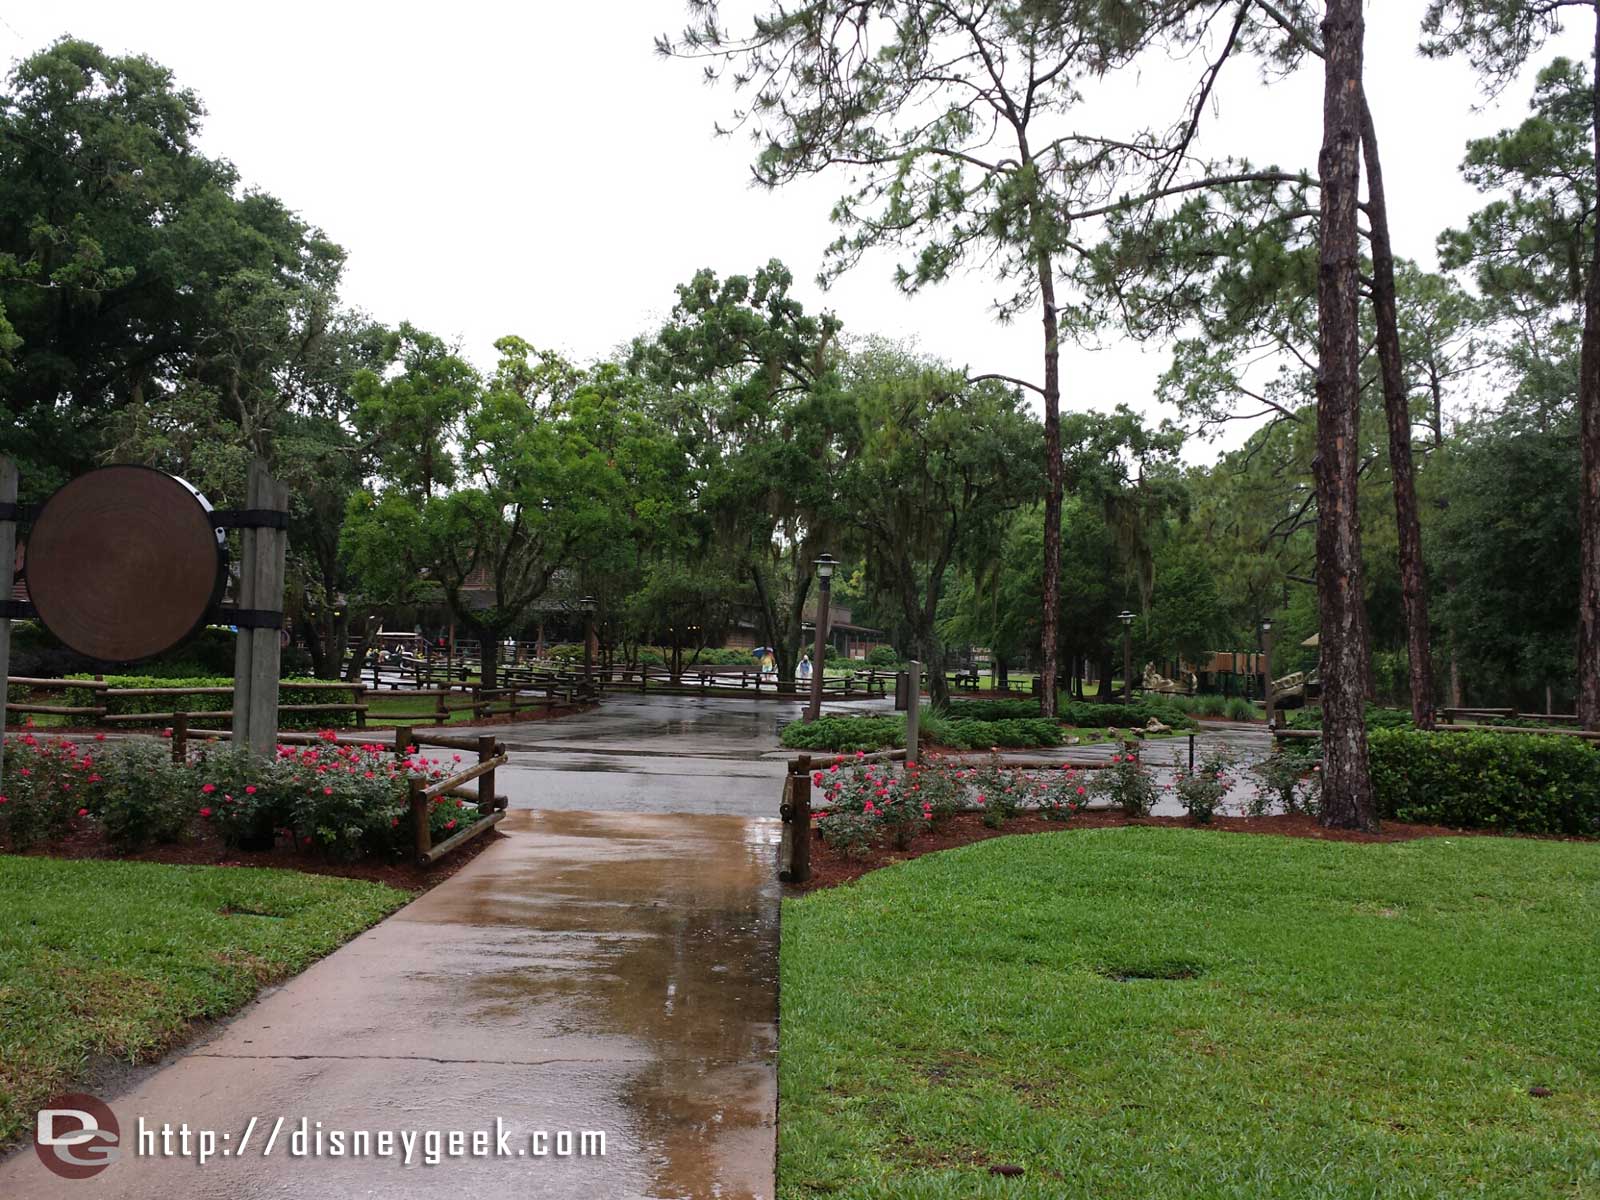 Arrived at a peaceful Fort Wilderness, it was still raining.